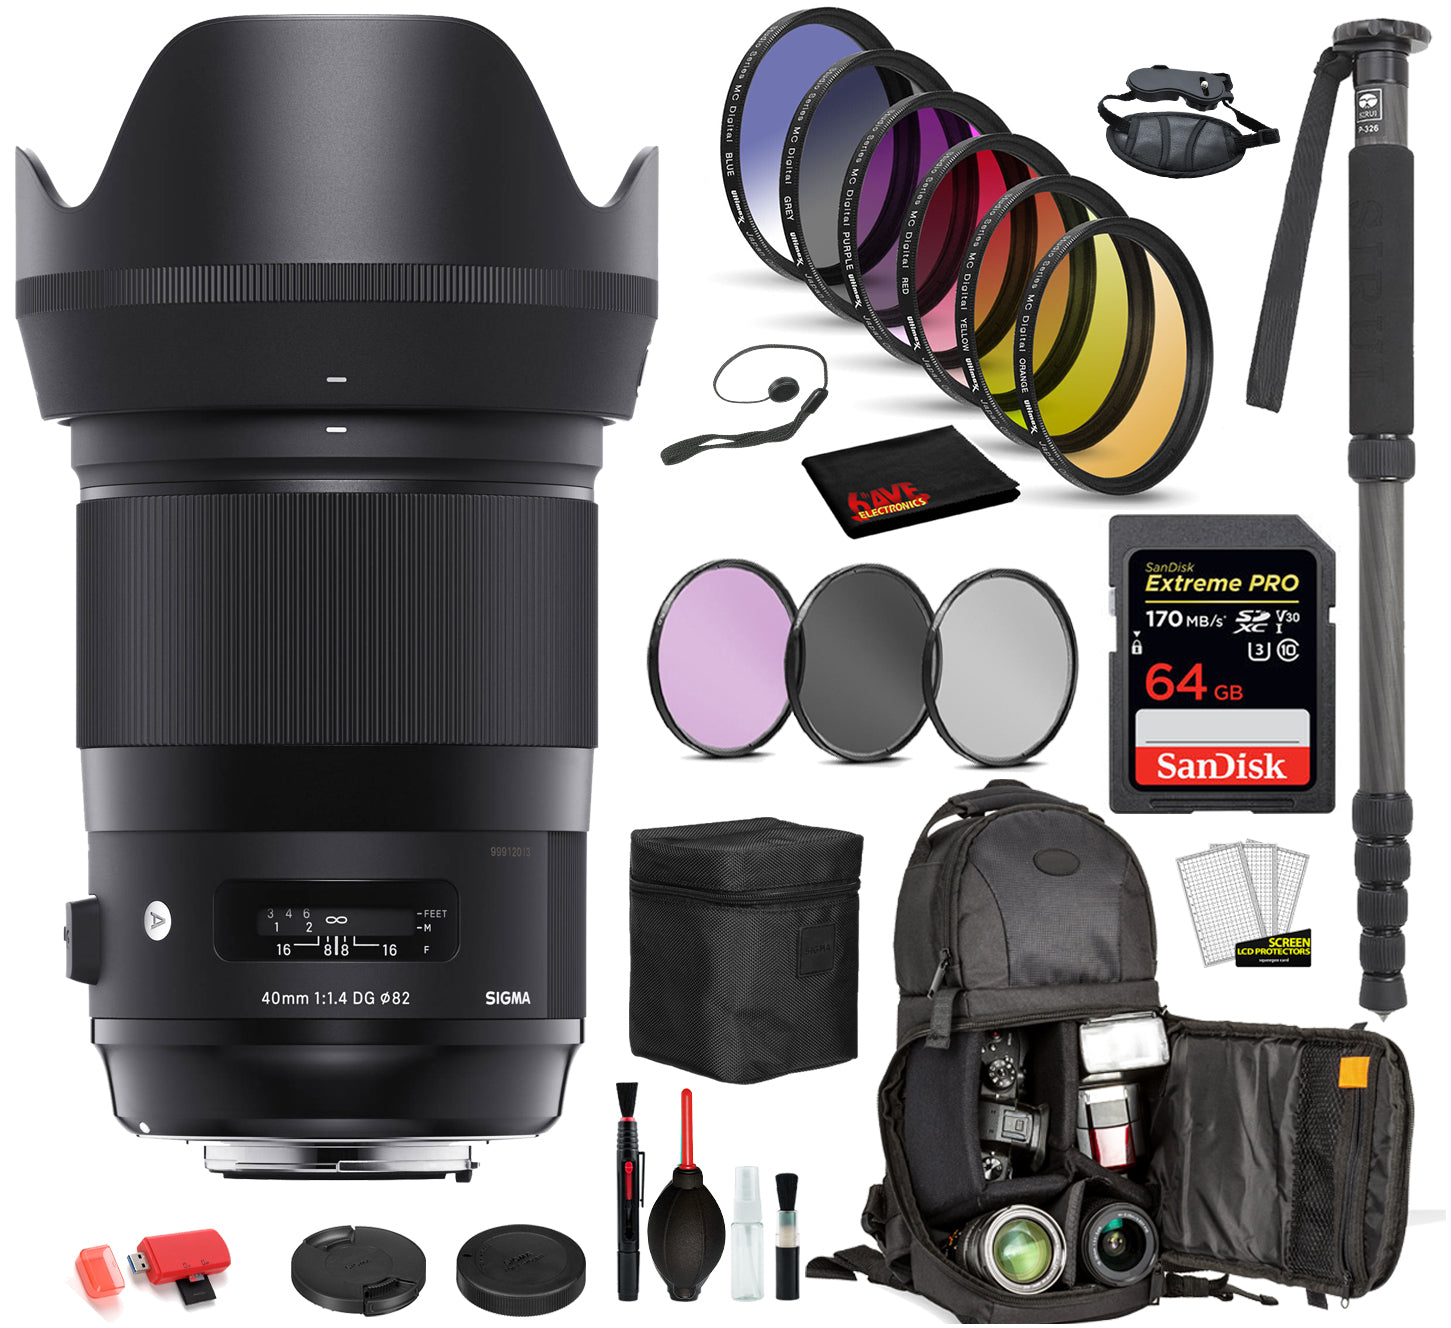 Sigma 40mm f/1.4 DG HSM Art Lens for Sony E Mount (332965) with: Sandisk Extreme Pro 64gb SD Card, 9PC Filter Kit + More